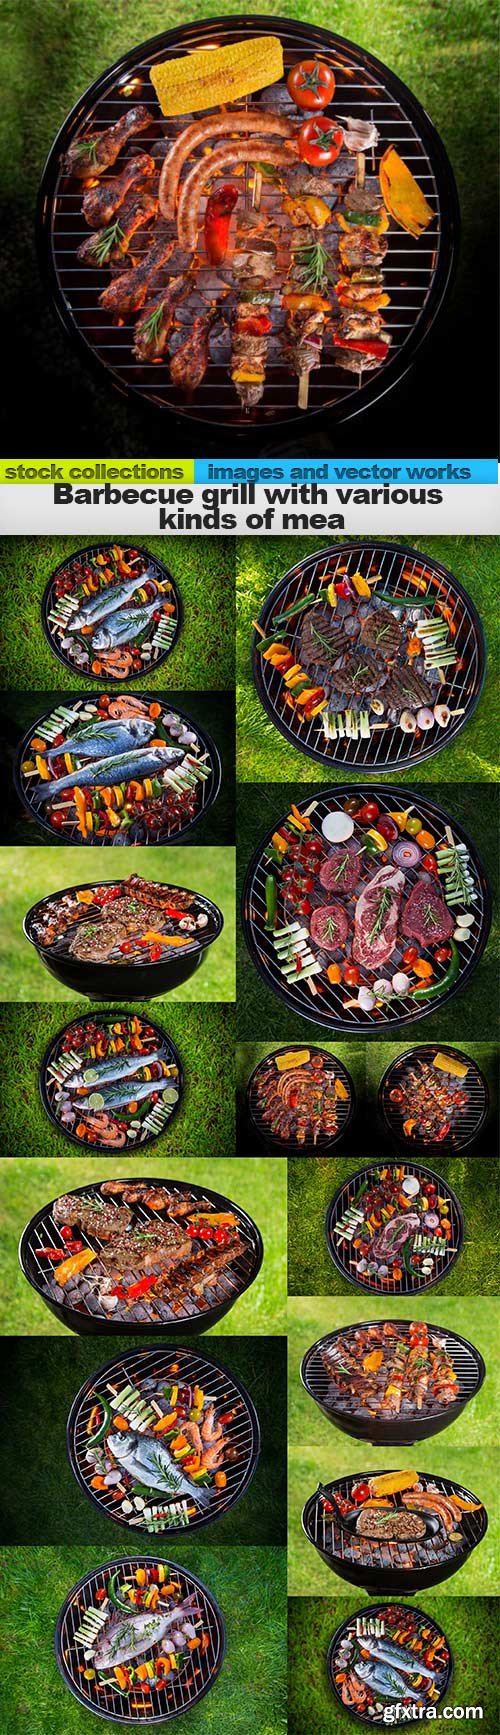 Barbecue grill with various kinds of mea, 15 x UHQ JPEG